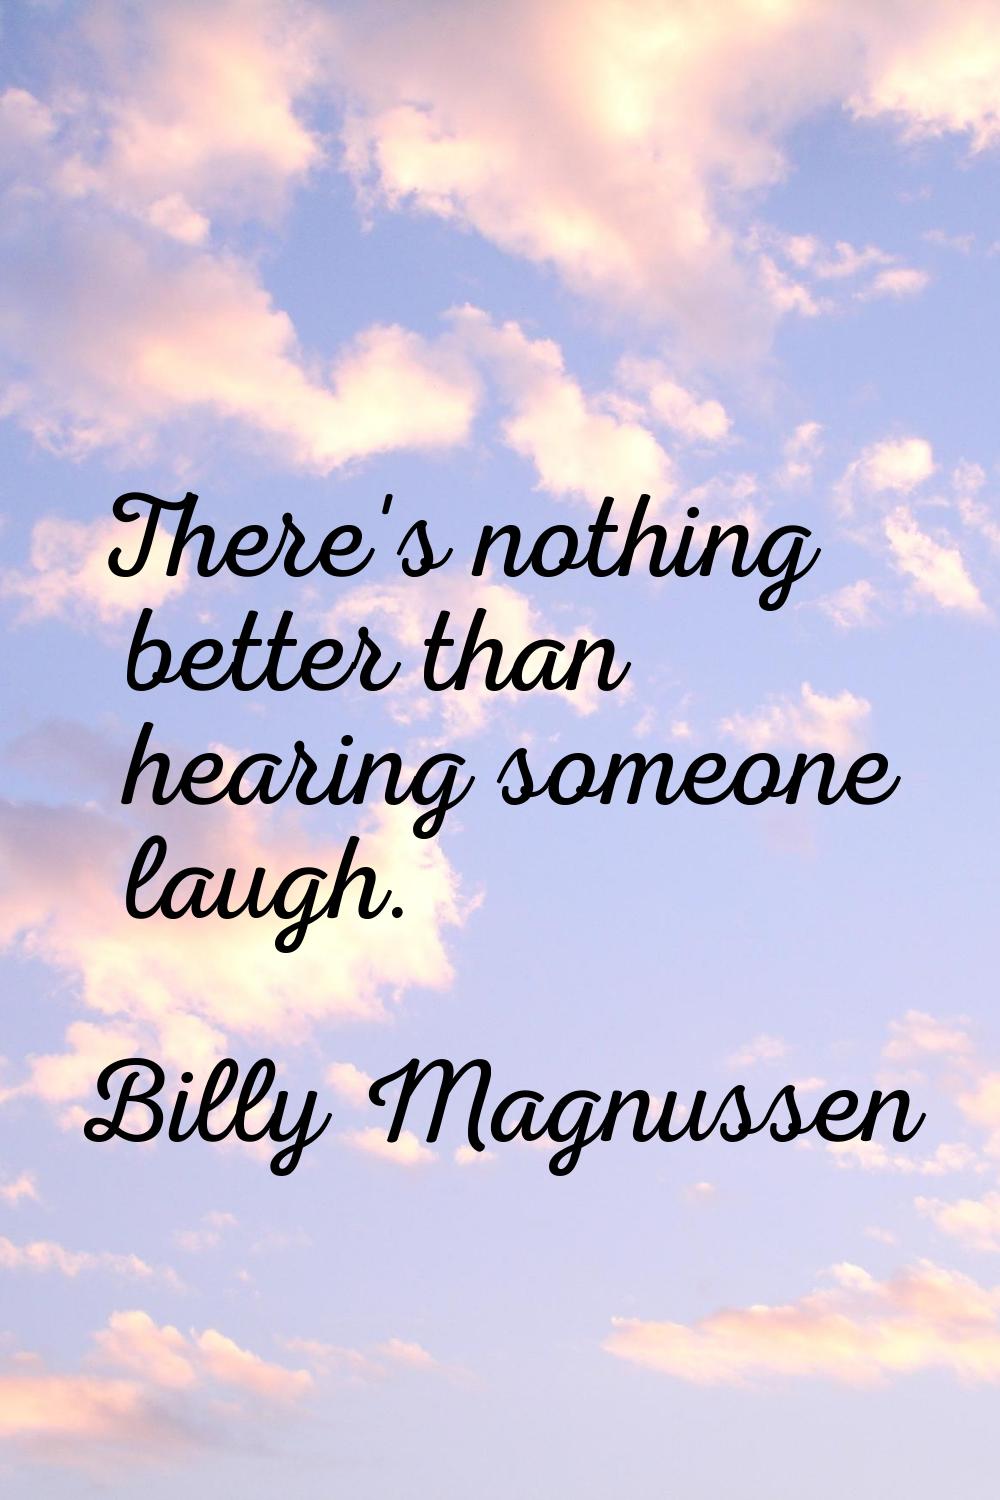 There's nothing better than hearing someone laugh.